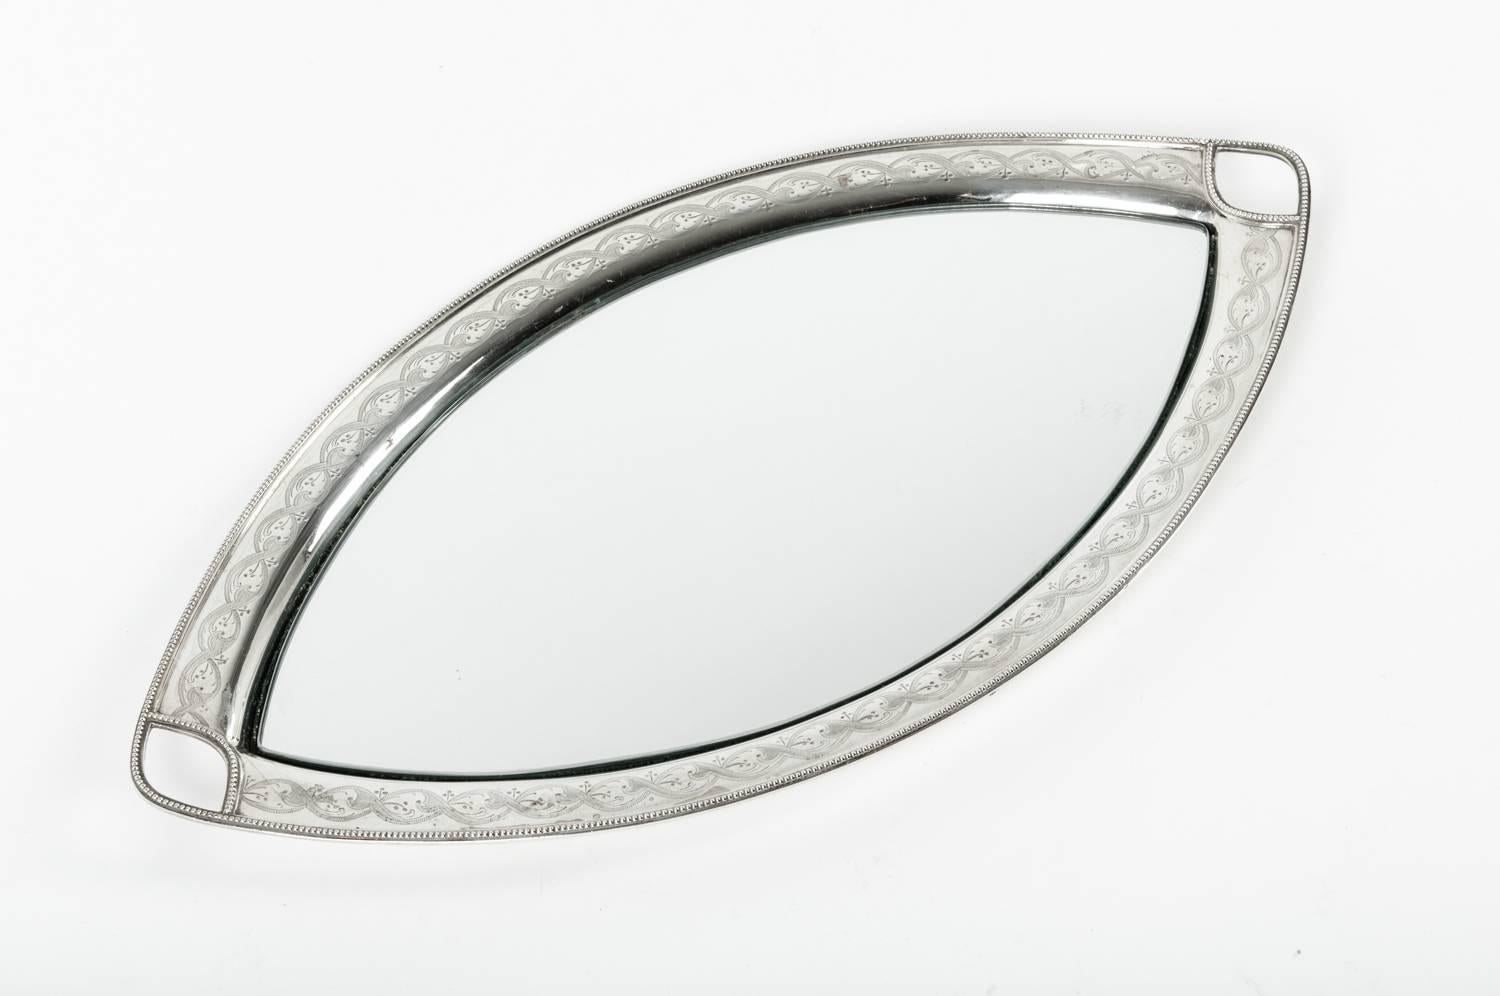 Antique footed English silver plate oval tray with insert mirror. The tray is excellent condition , maker's mark undersigned . The tray measure 21 inches long x 10 inches width.